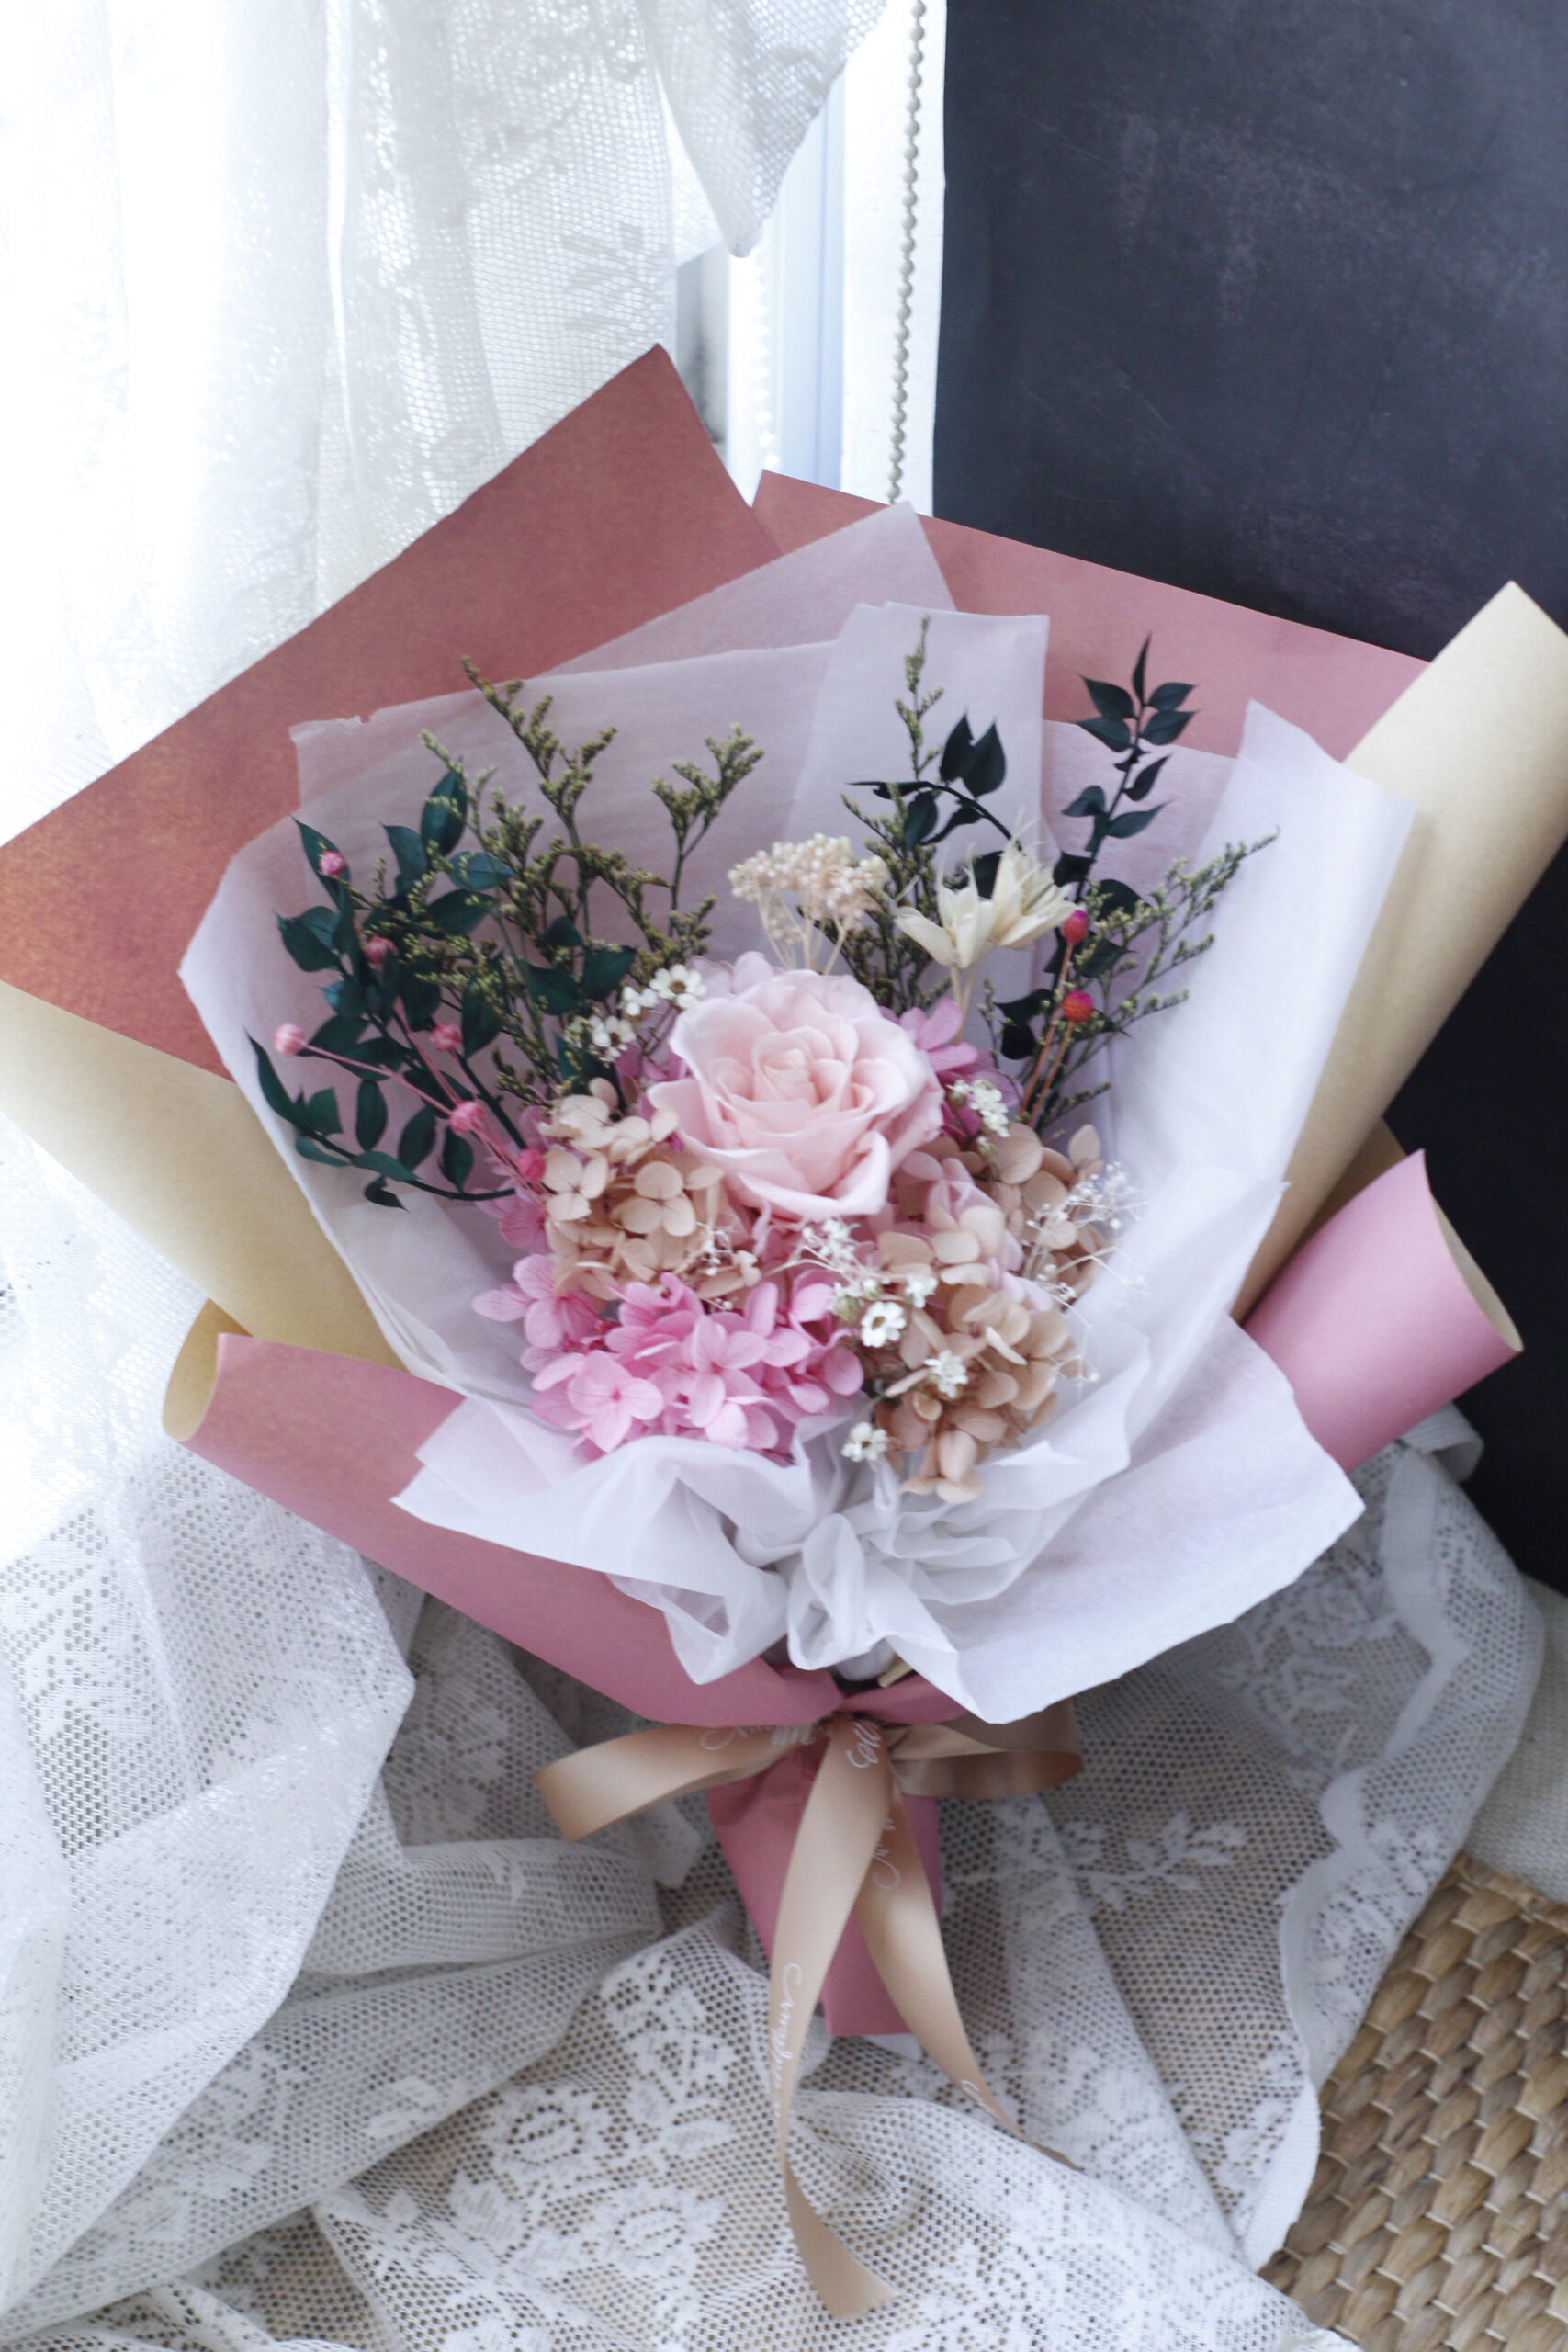 Fifty Shades of Pink Bouquet